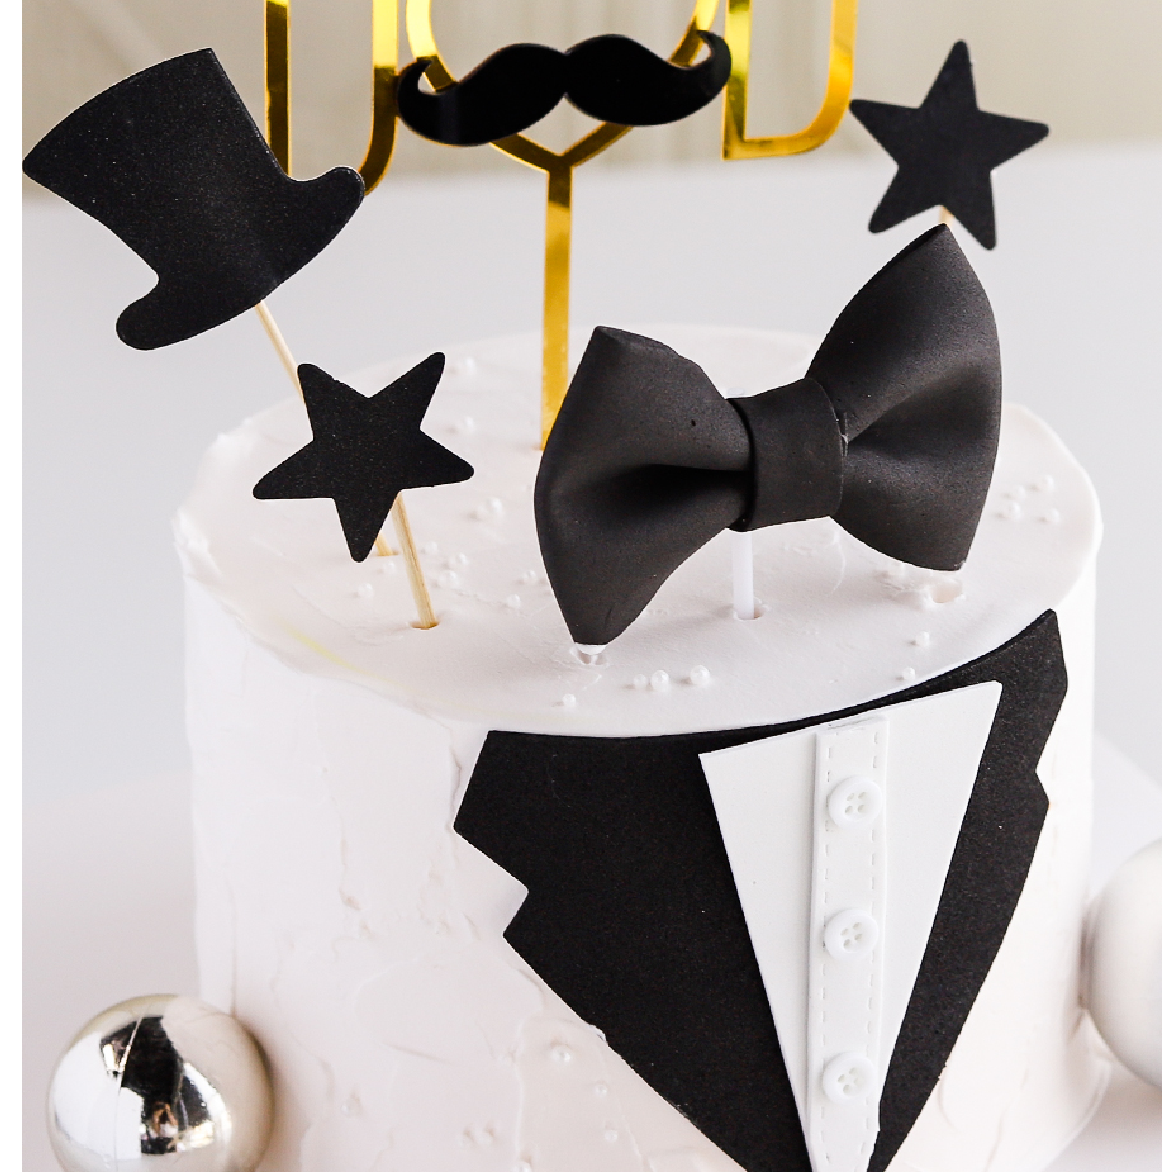 Cake Topper, Cake Decoration - Fathers Day Dad Suit Bow Tie